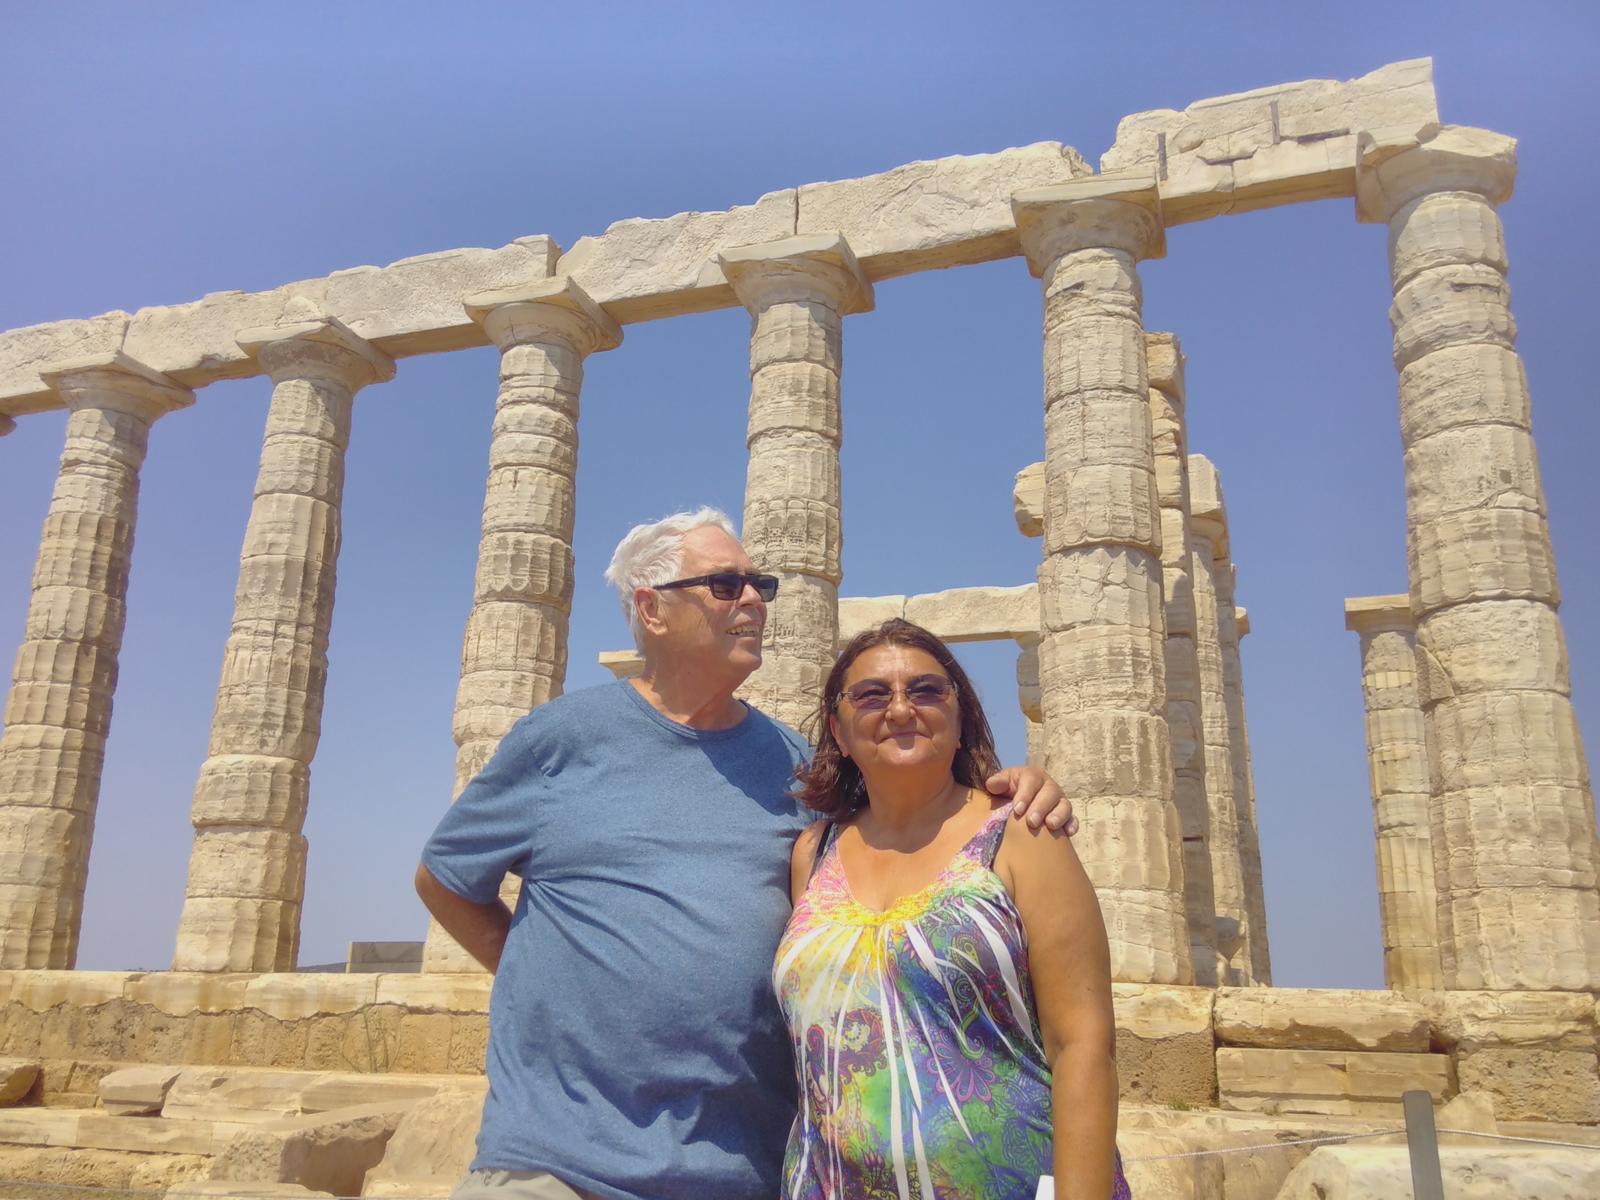 Mom & Dad at the Temple of Poseiodon